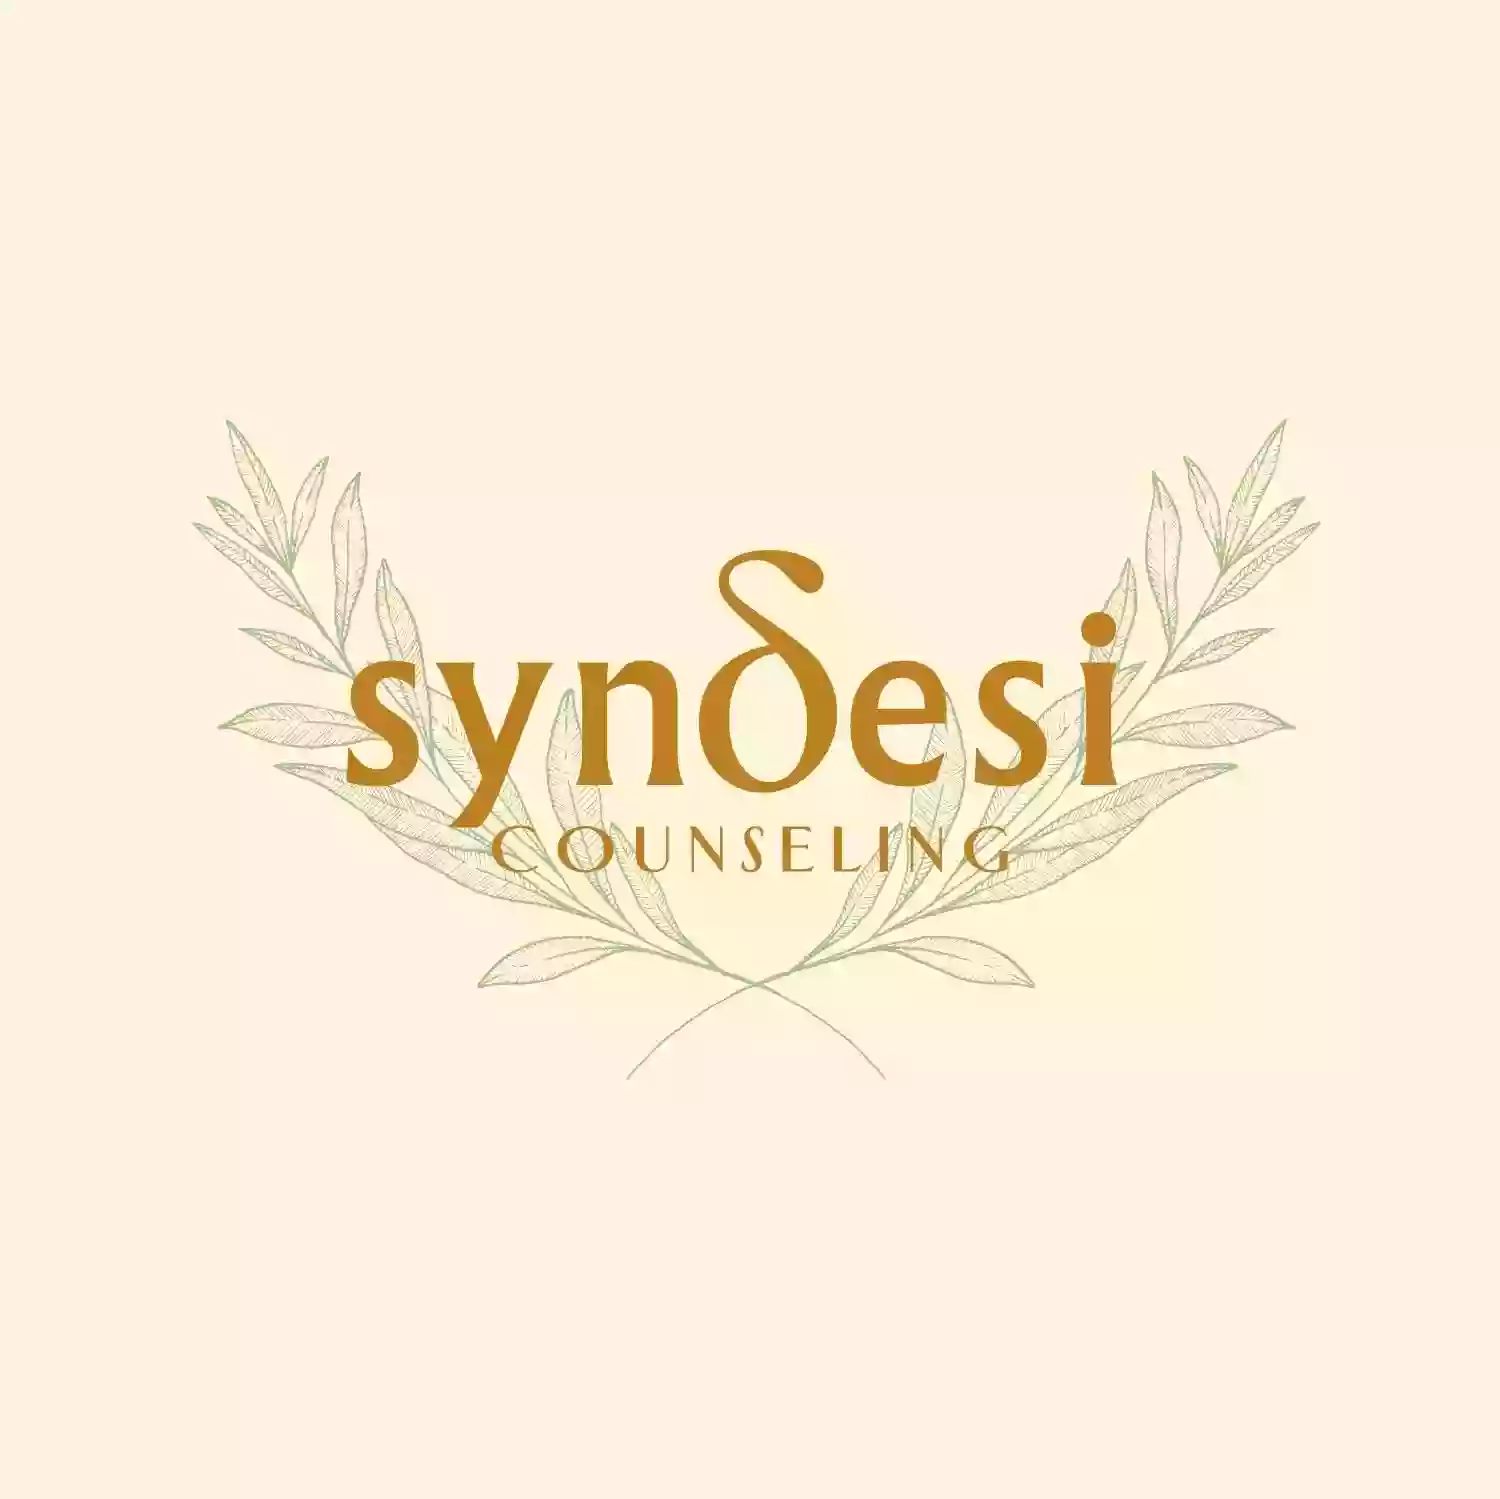 Syndesi Counseling